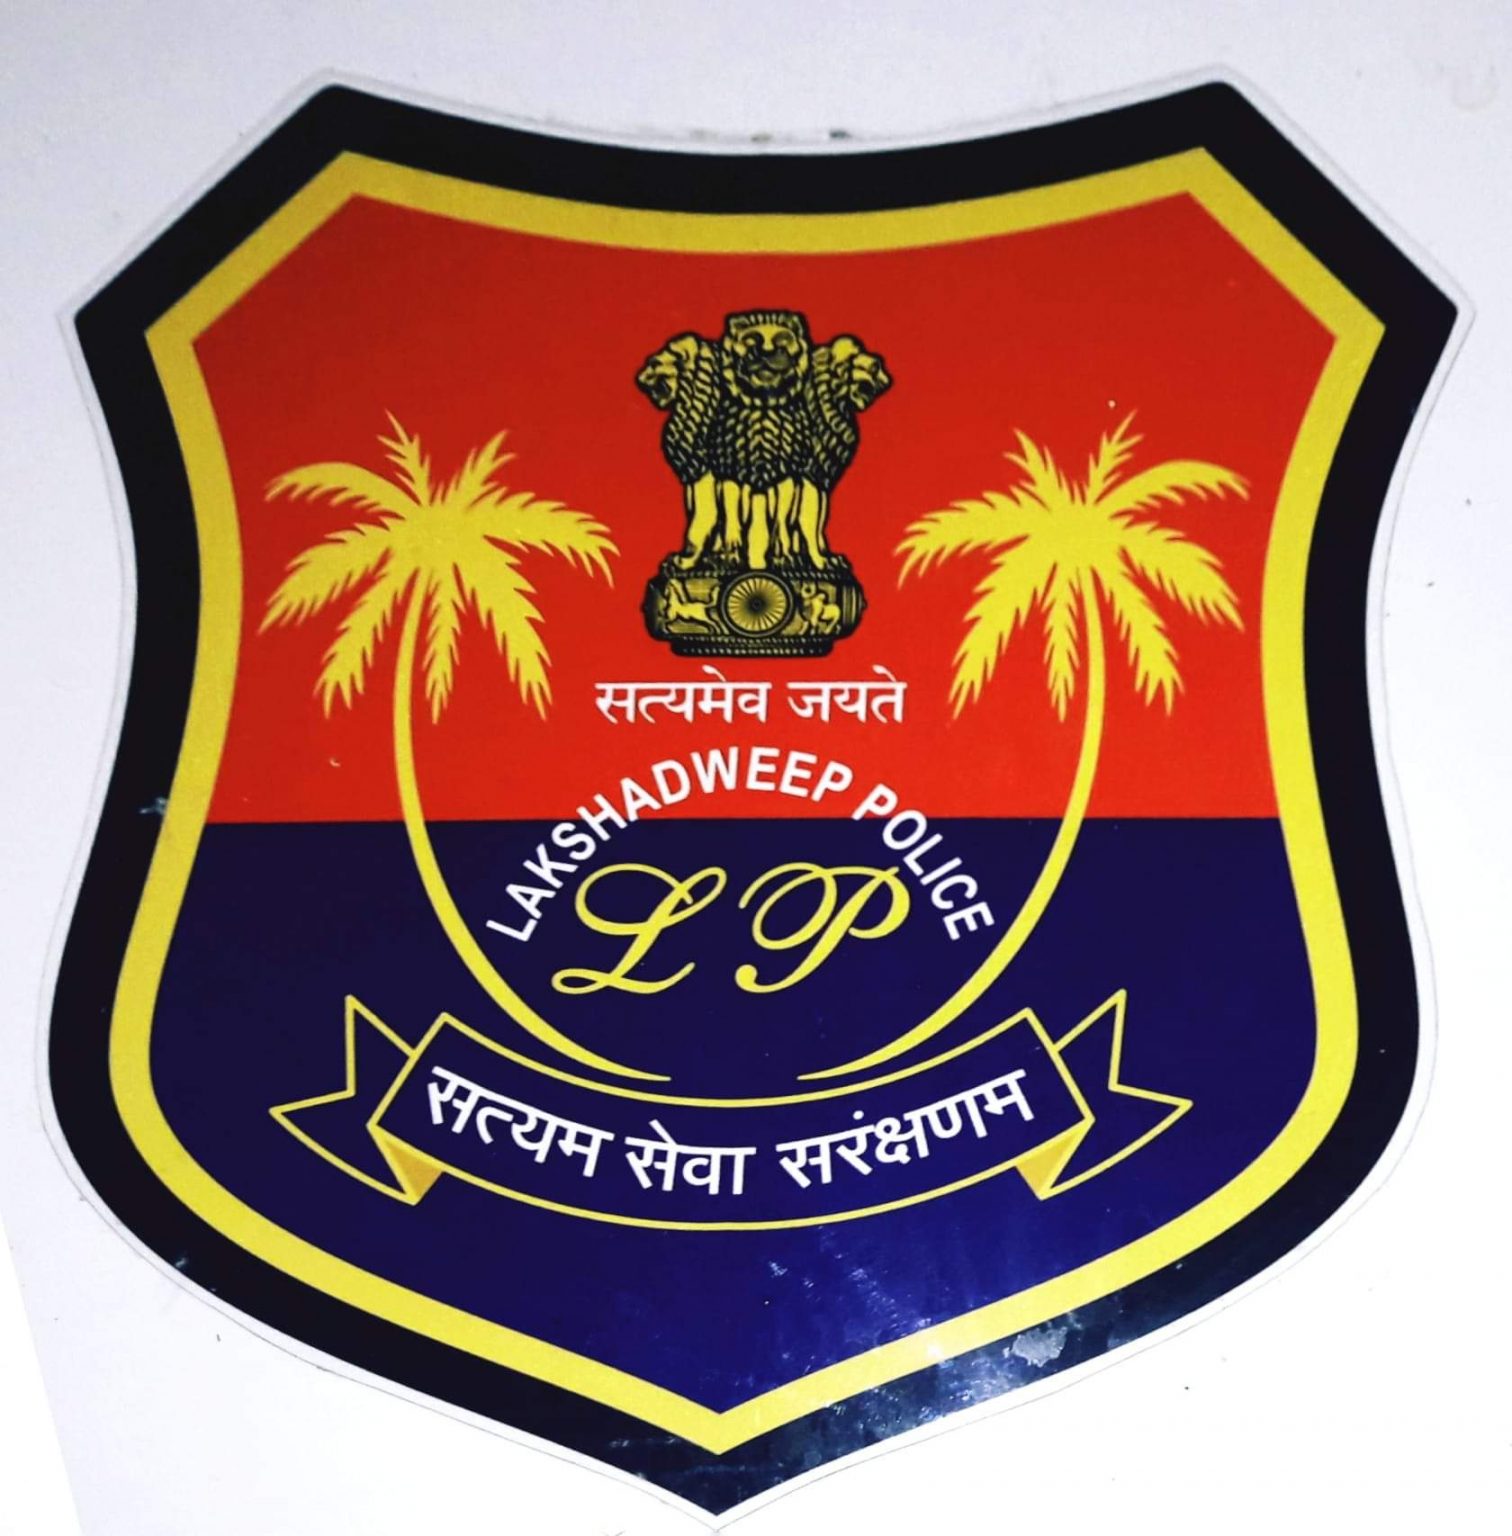 Lakshadweep Police Recruitment 2021 1500 Upcoming Constable SI Vacancy Jobnotifys in